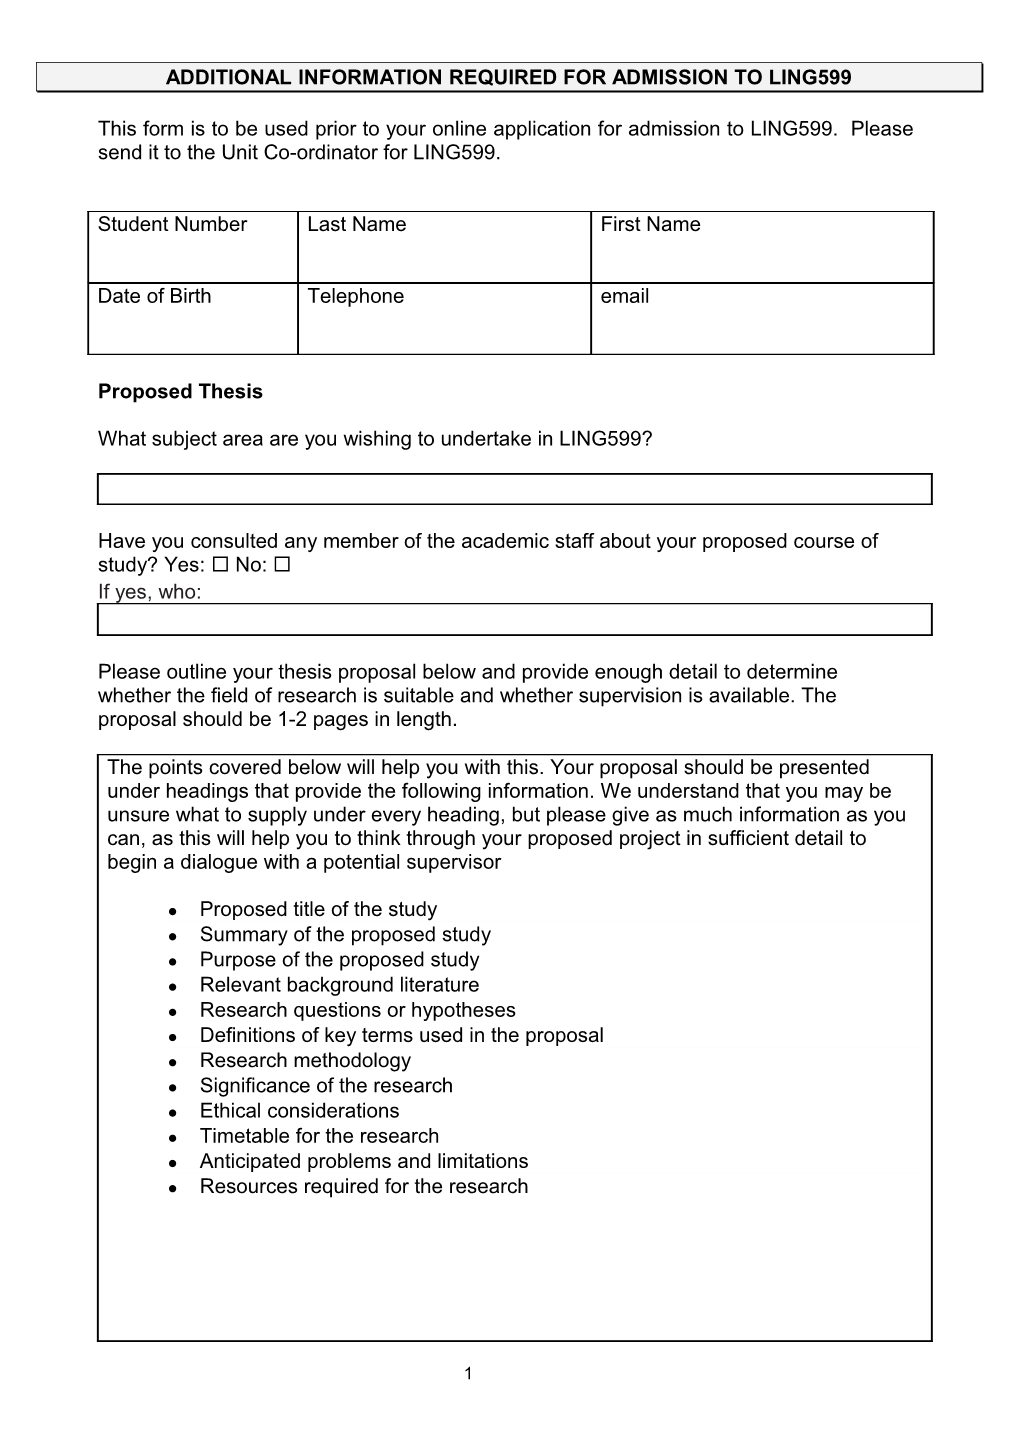 Honours Proposed Thesis Form